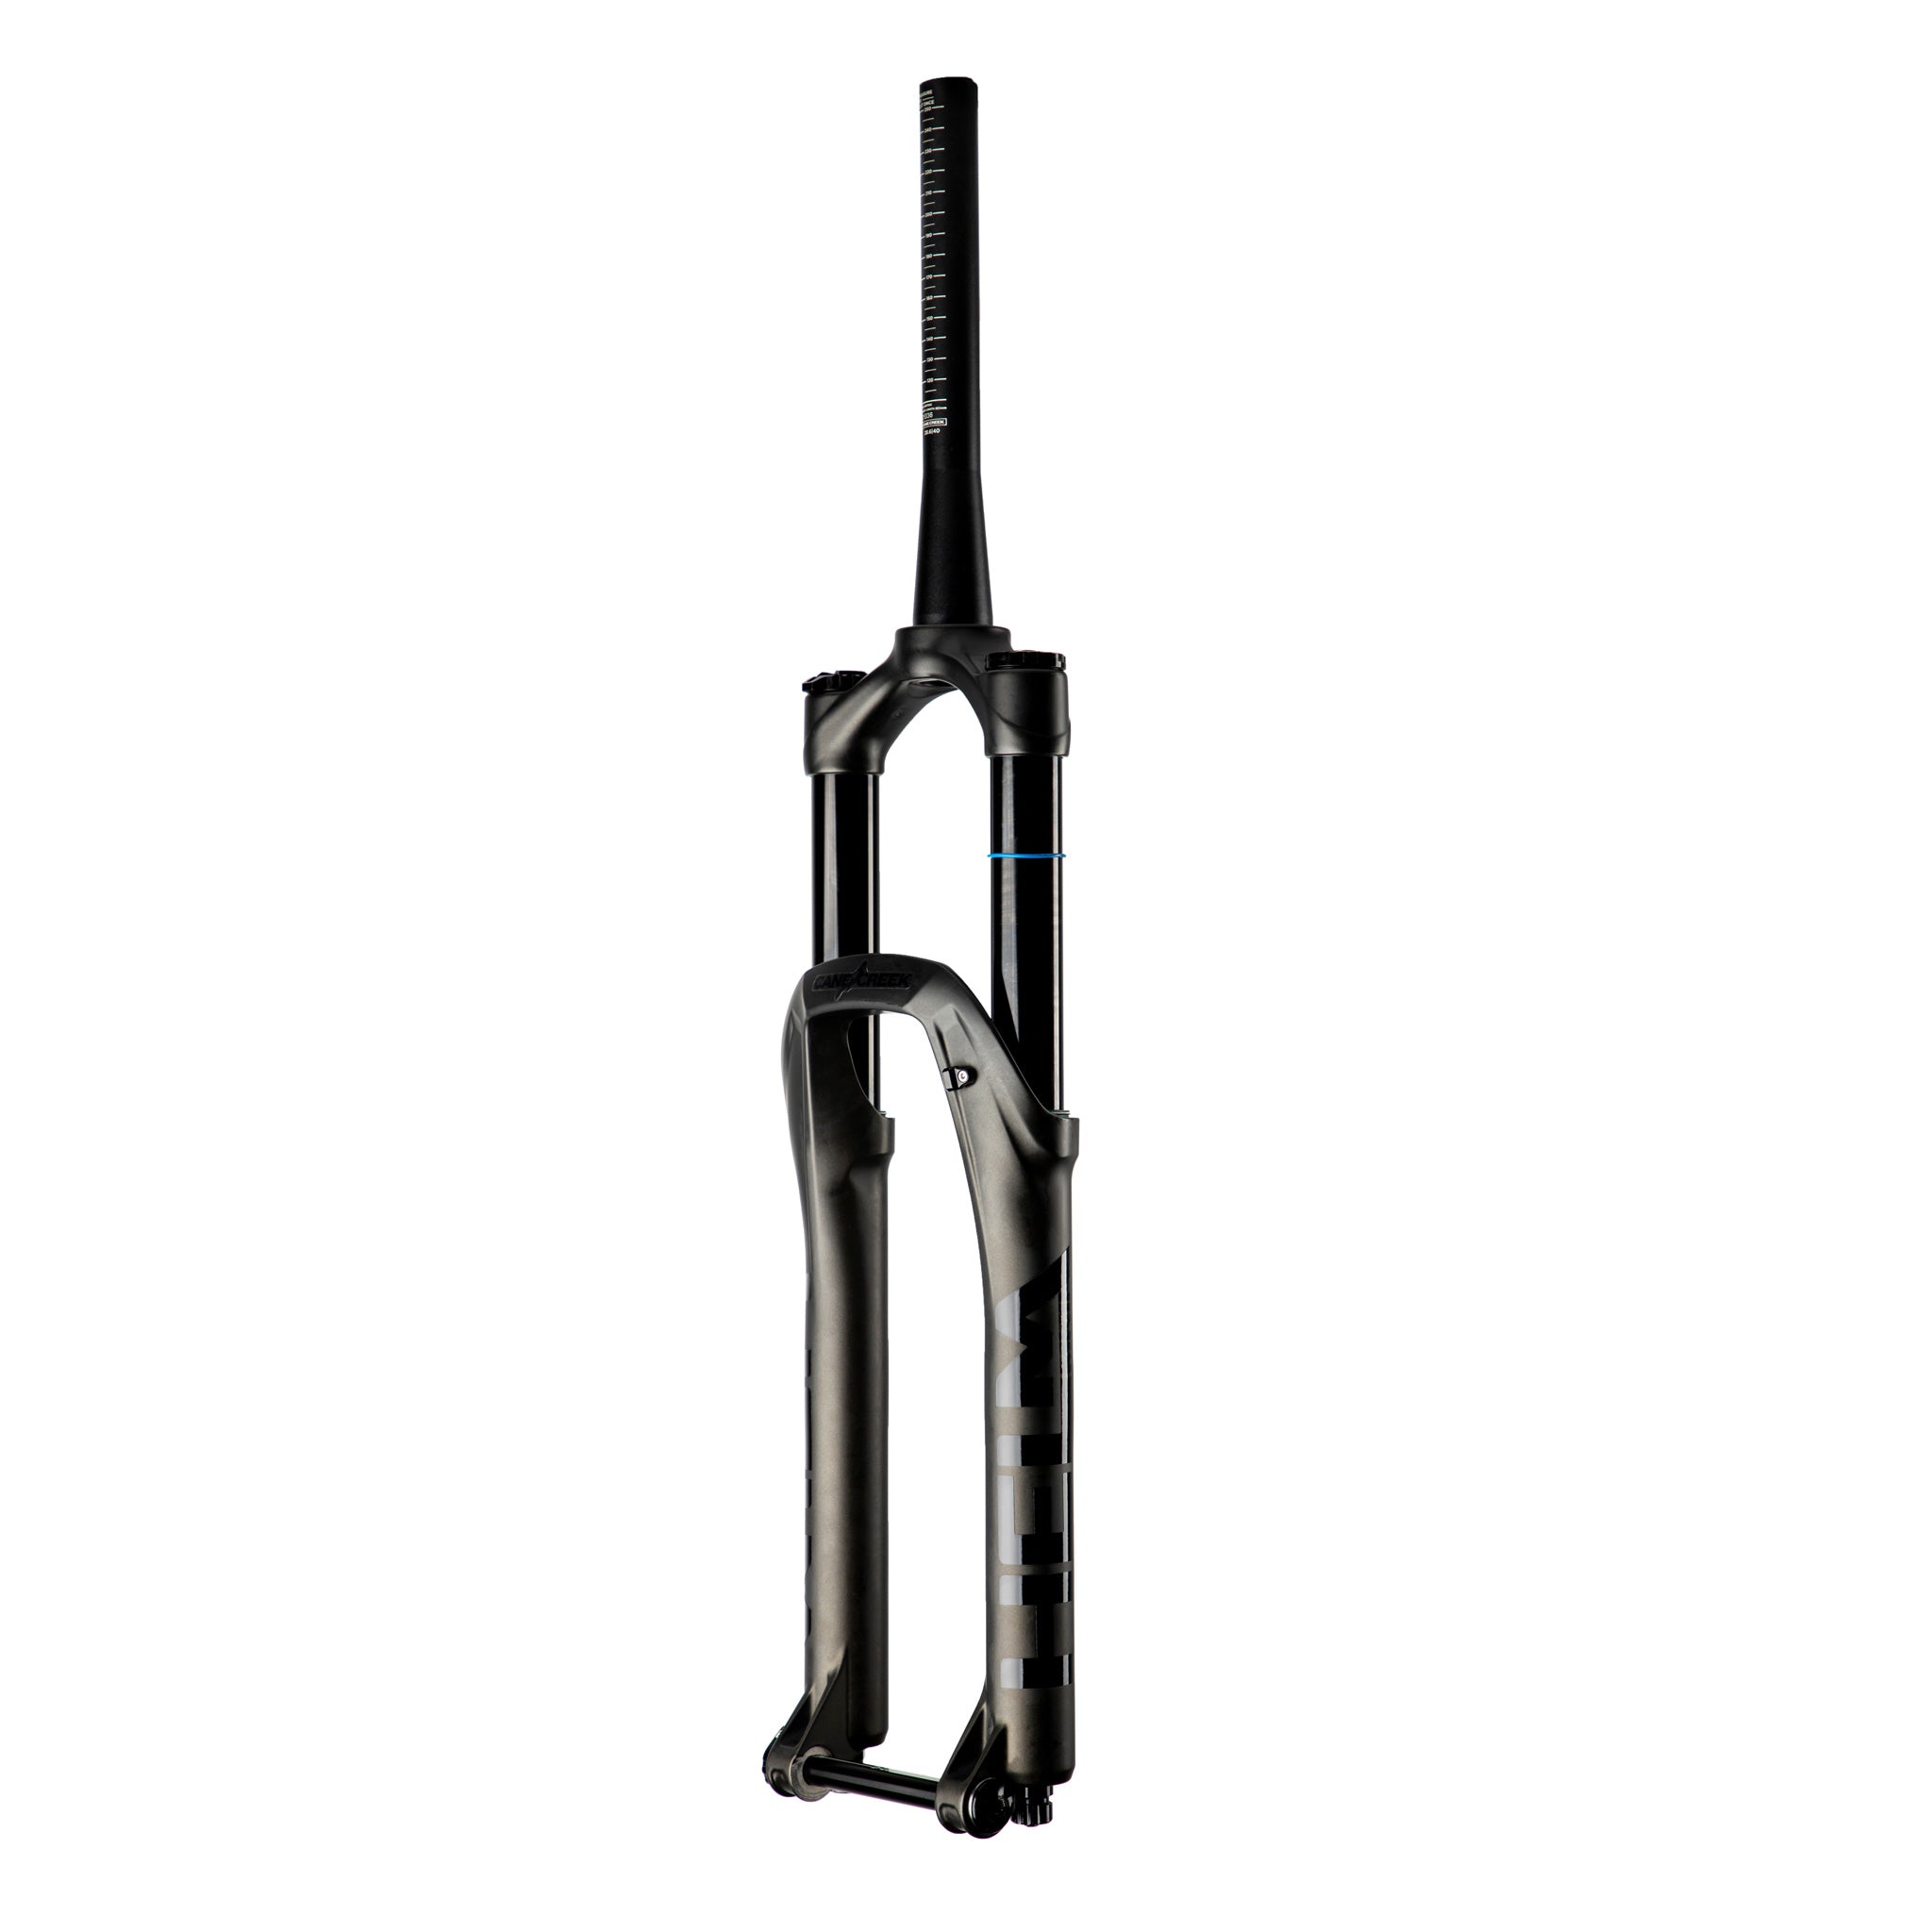 Cane Creek Helm MKII Coil 27.5 Suspension Fork - 27.5" 160 mm 15 x 110 mm 44 mm Offset Gloss BLK